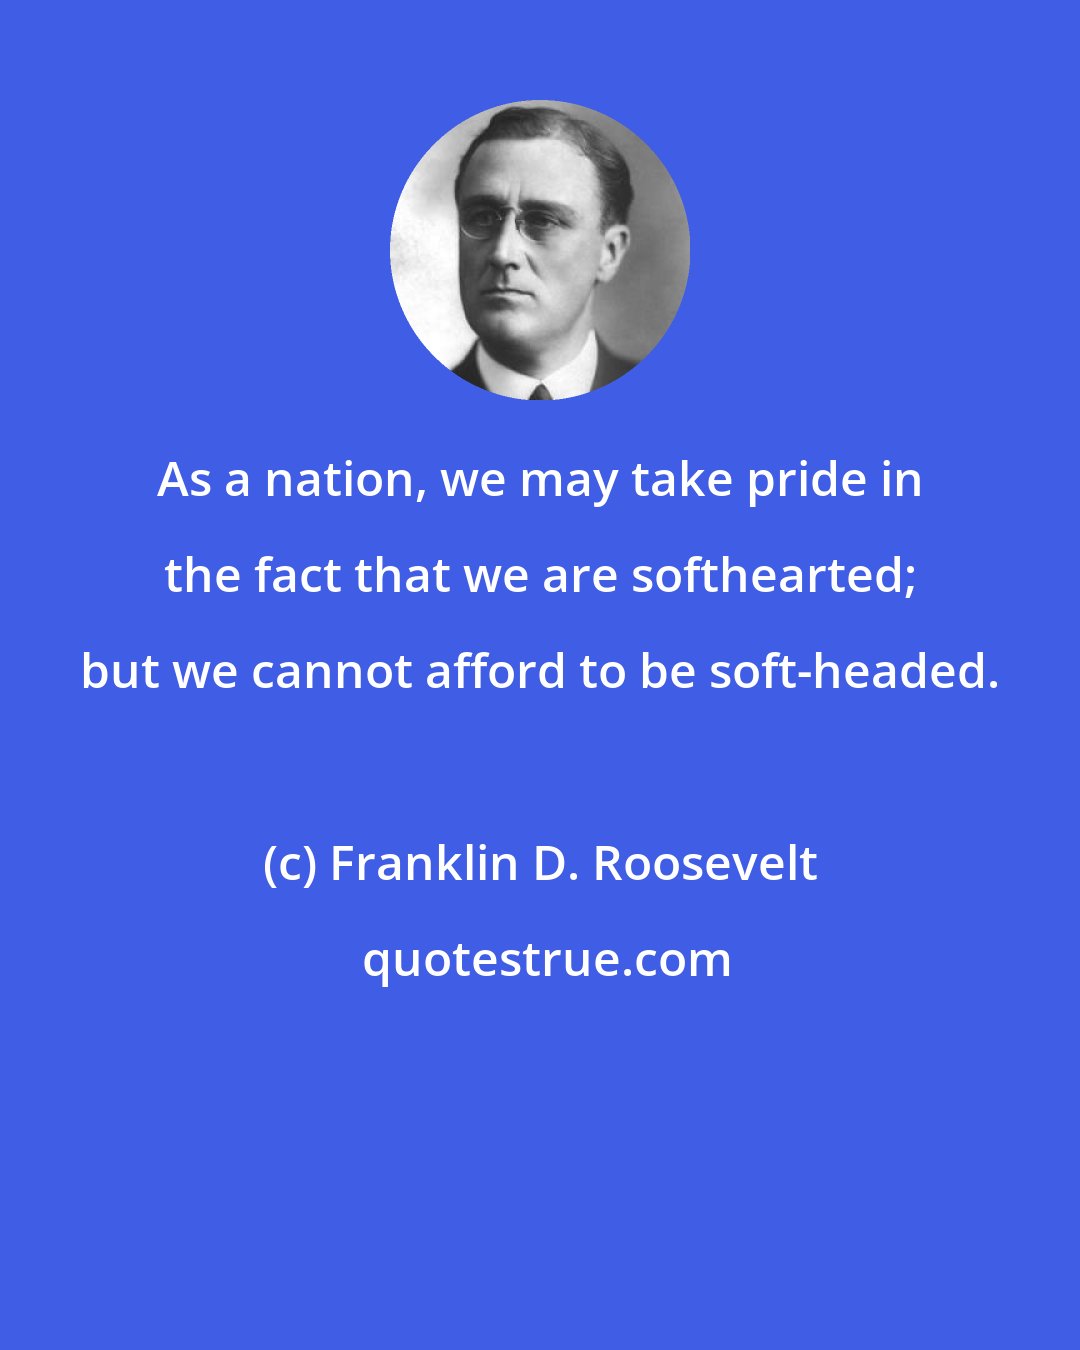 Franklin D. Roosevelt: As a nation, we may take pride in the fact that we are softhearted; but we cannot afford to be soft-headed.